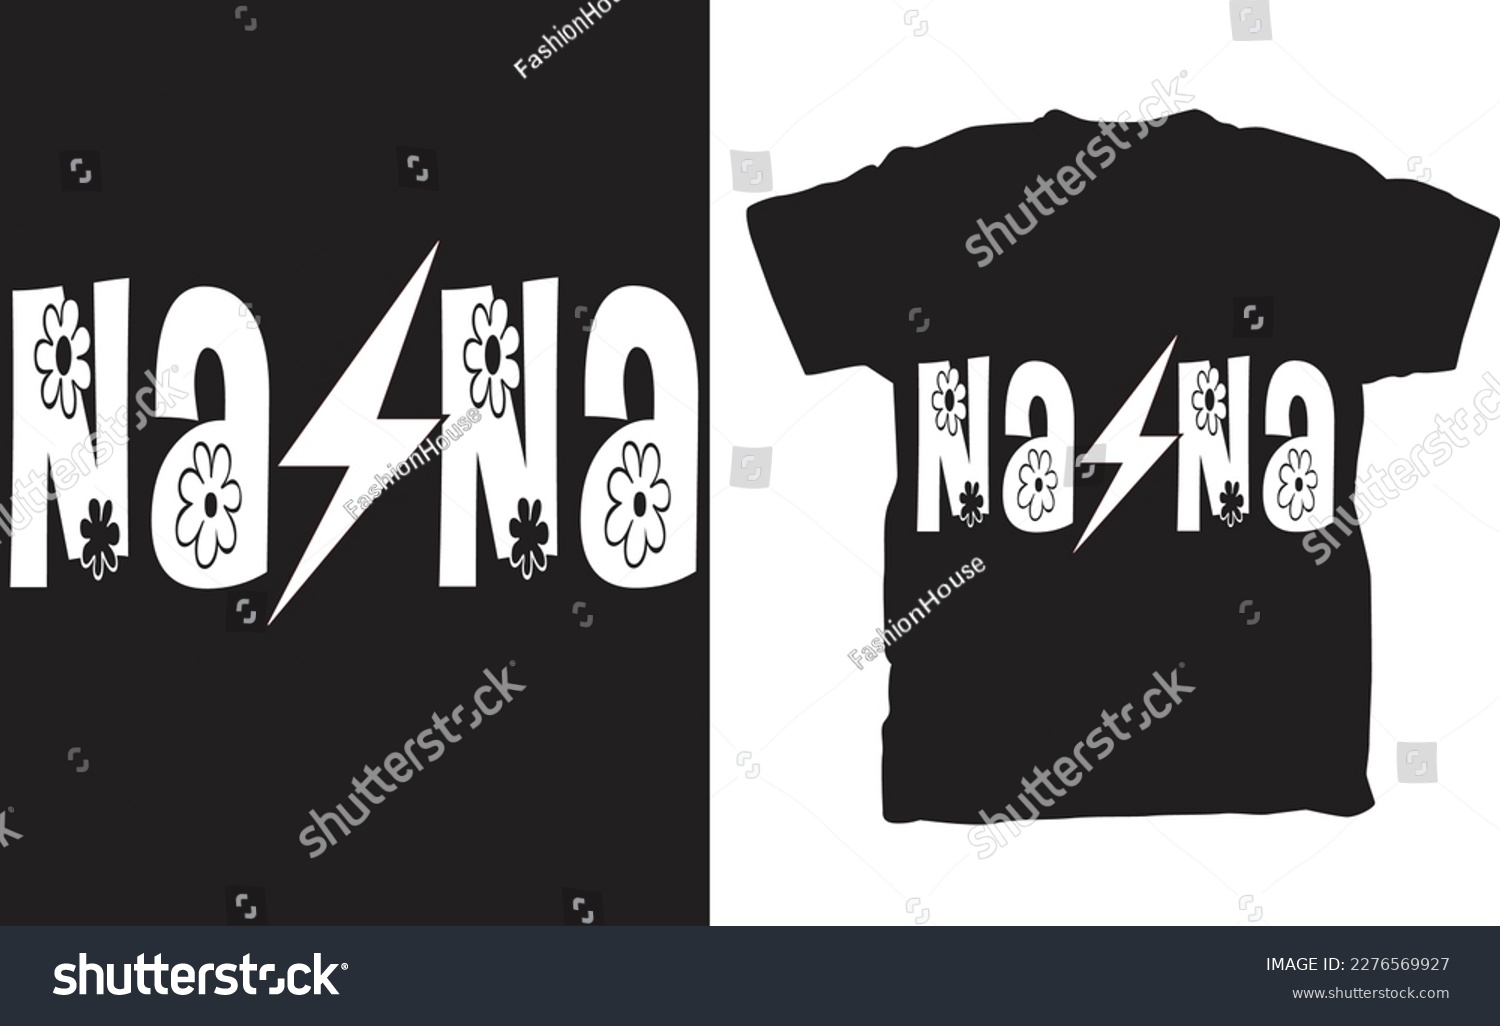 SVG of If you are referring to a t-shirt with an SVG (Scalable Vector Graphics) design on it, an SVG is a type of image format that can be scaled up or down without losing quality. Therefore, a Nana SVG t-sh svg